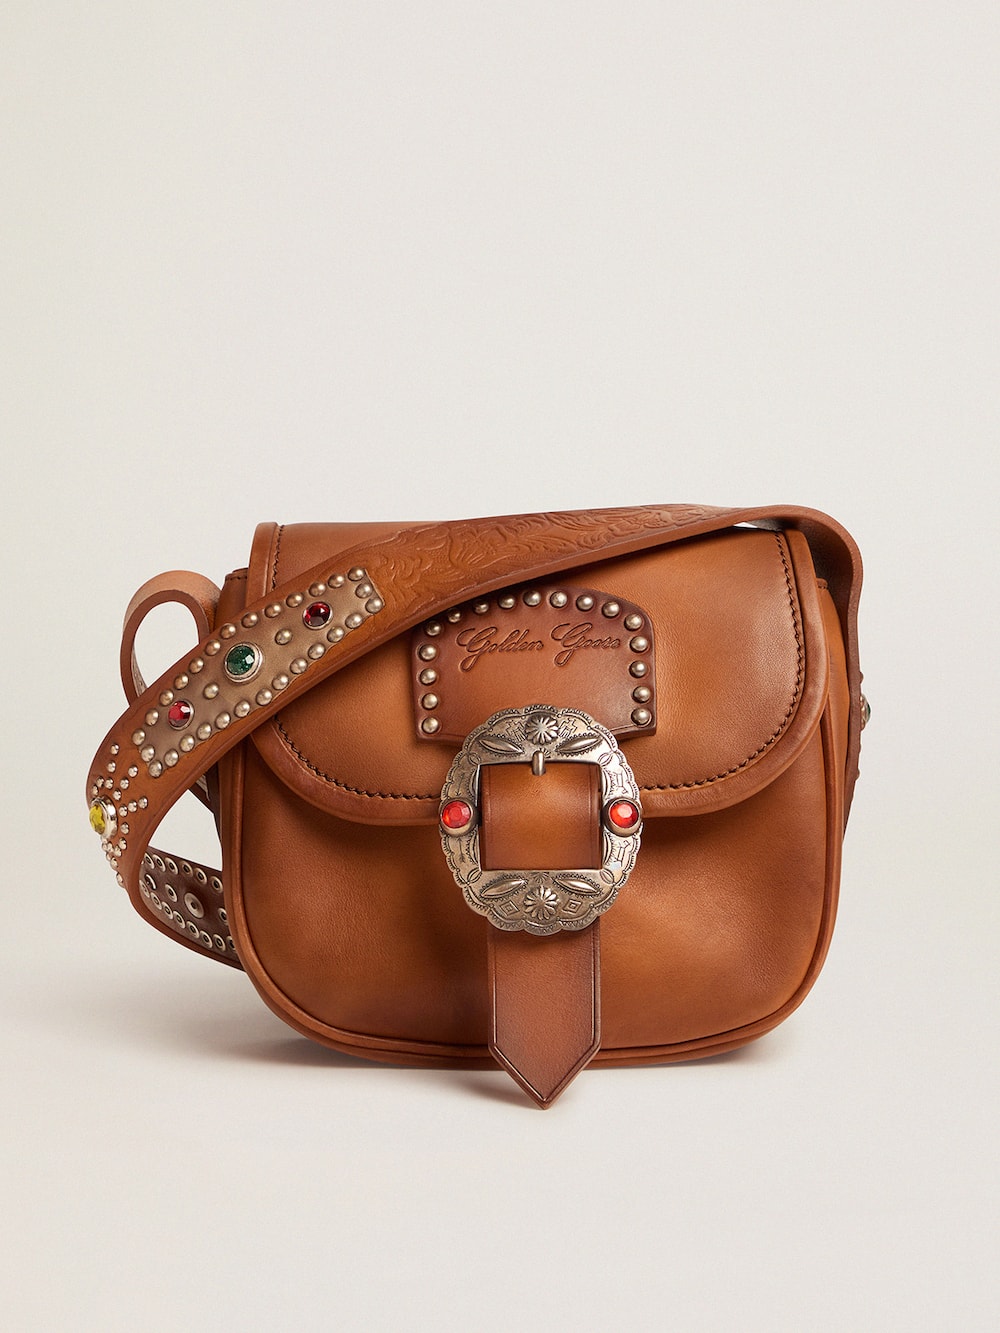 Golden Goose - Small Rodeo Bag in leather with decorative studs in 